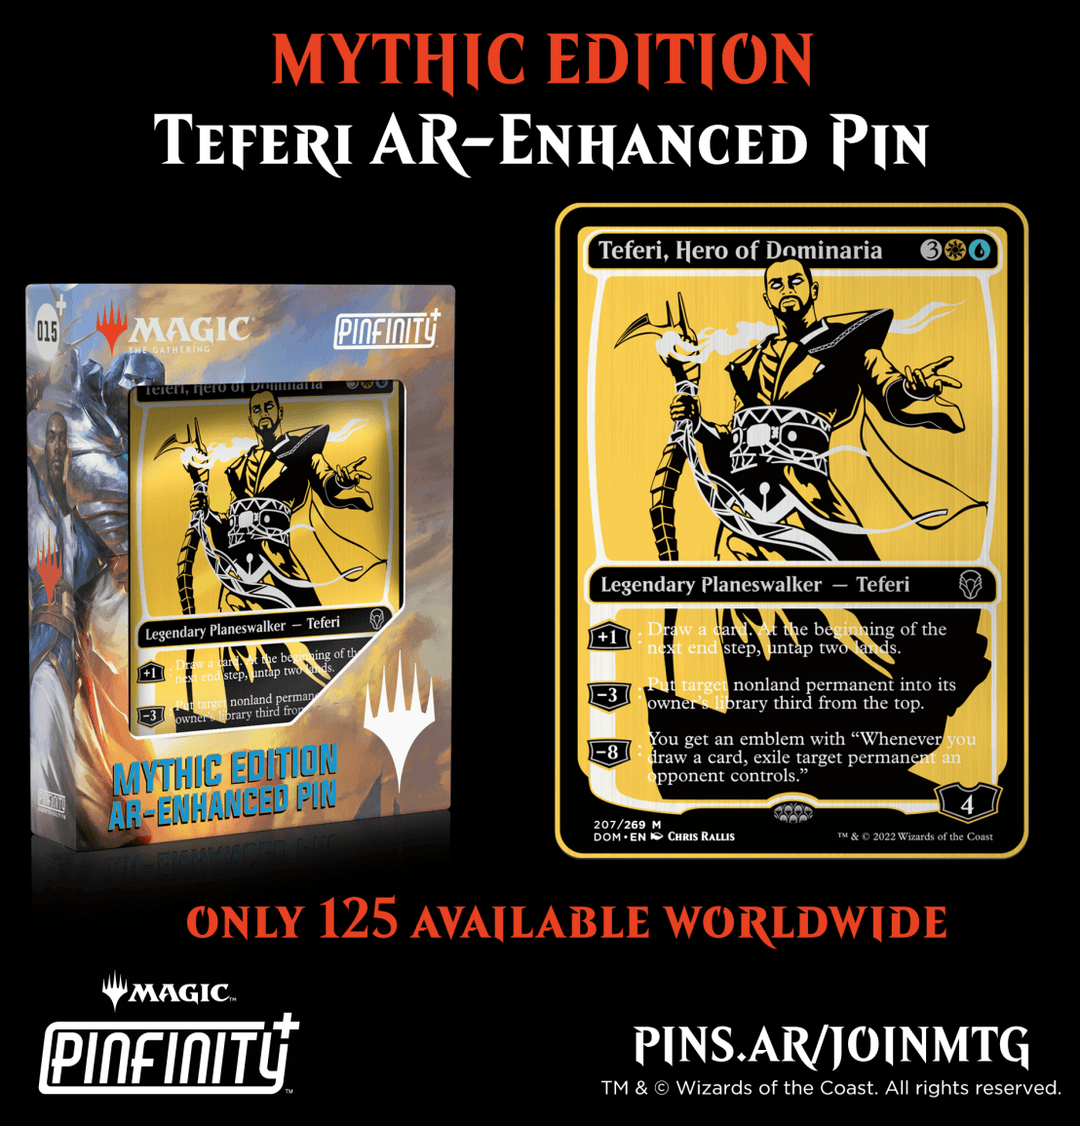 Exclusive Mythic Edition Teferi Pin Launch!